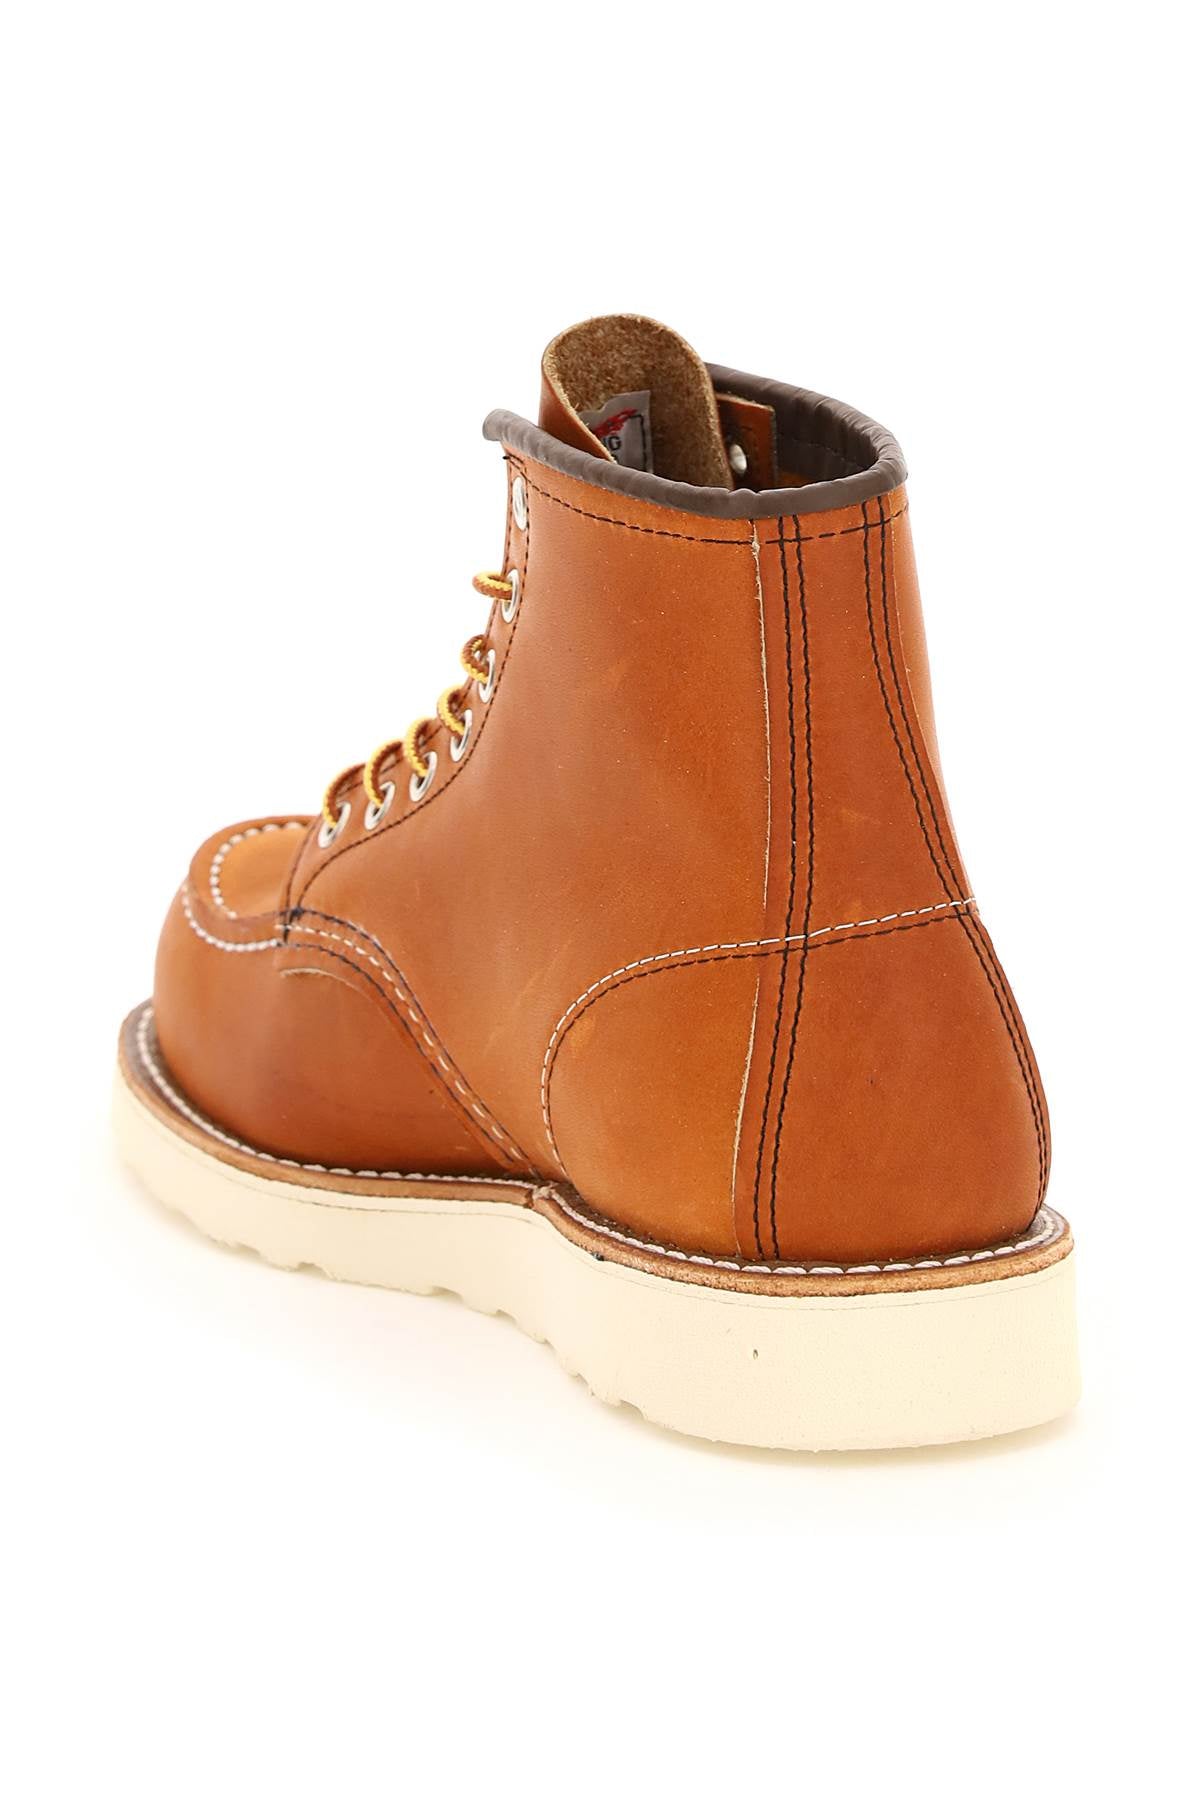 Red Wing Shoes Classic Moc Ankle Boots   Brown